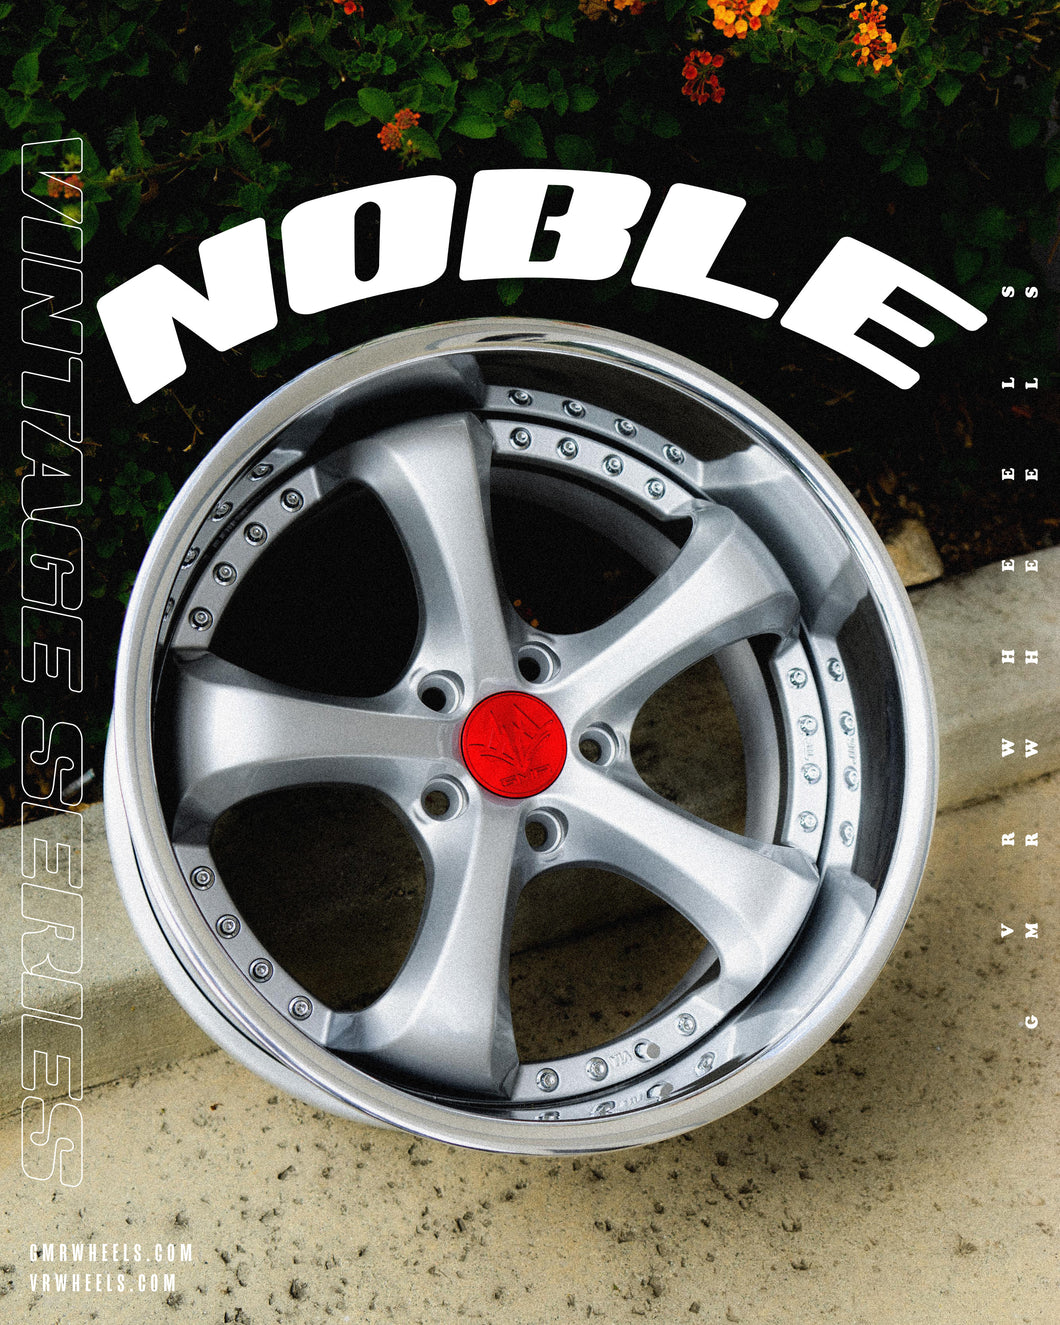 GMR NOBLE - Coming Soon